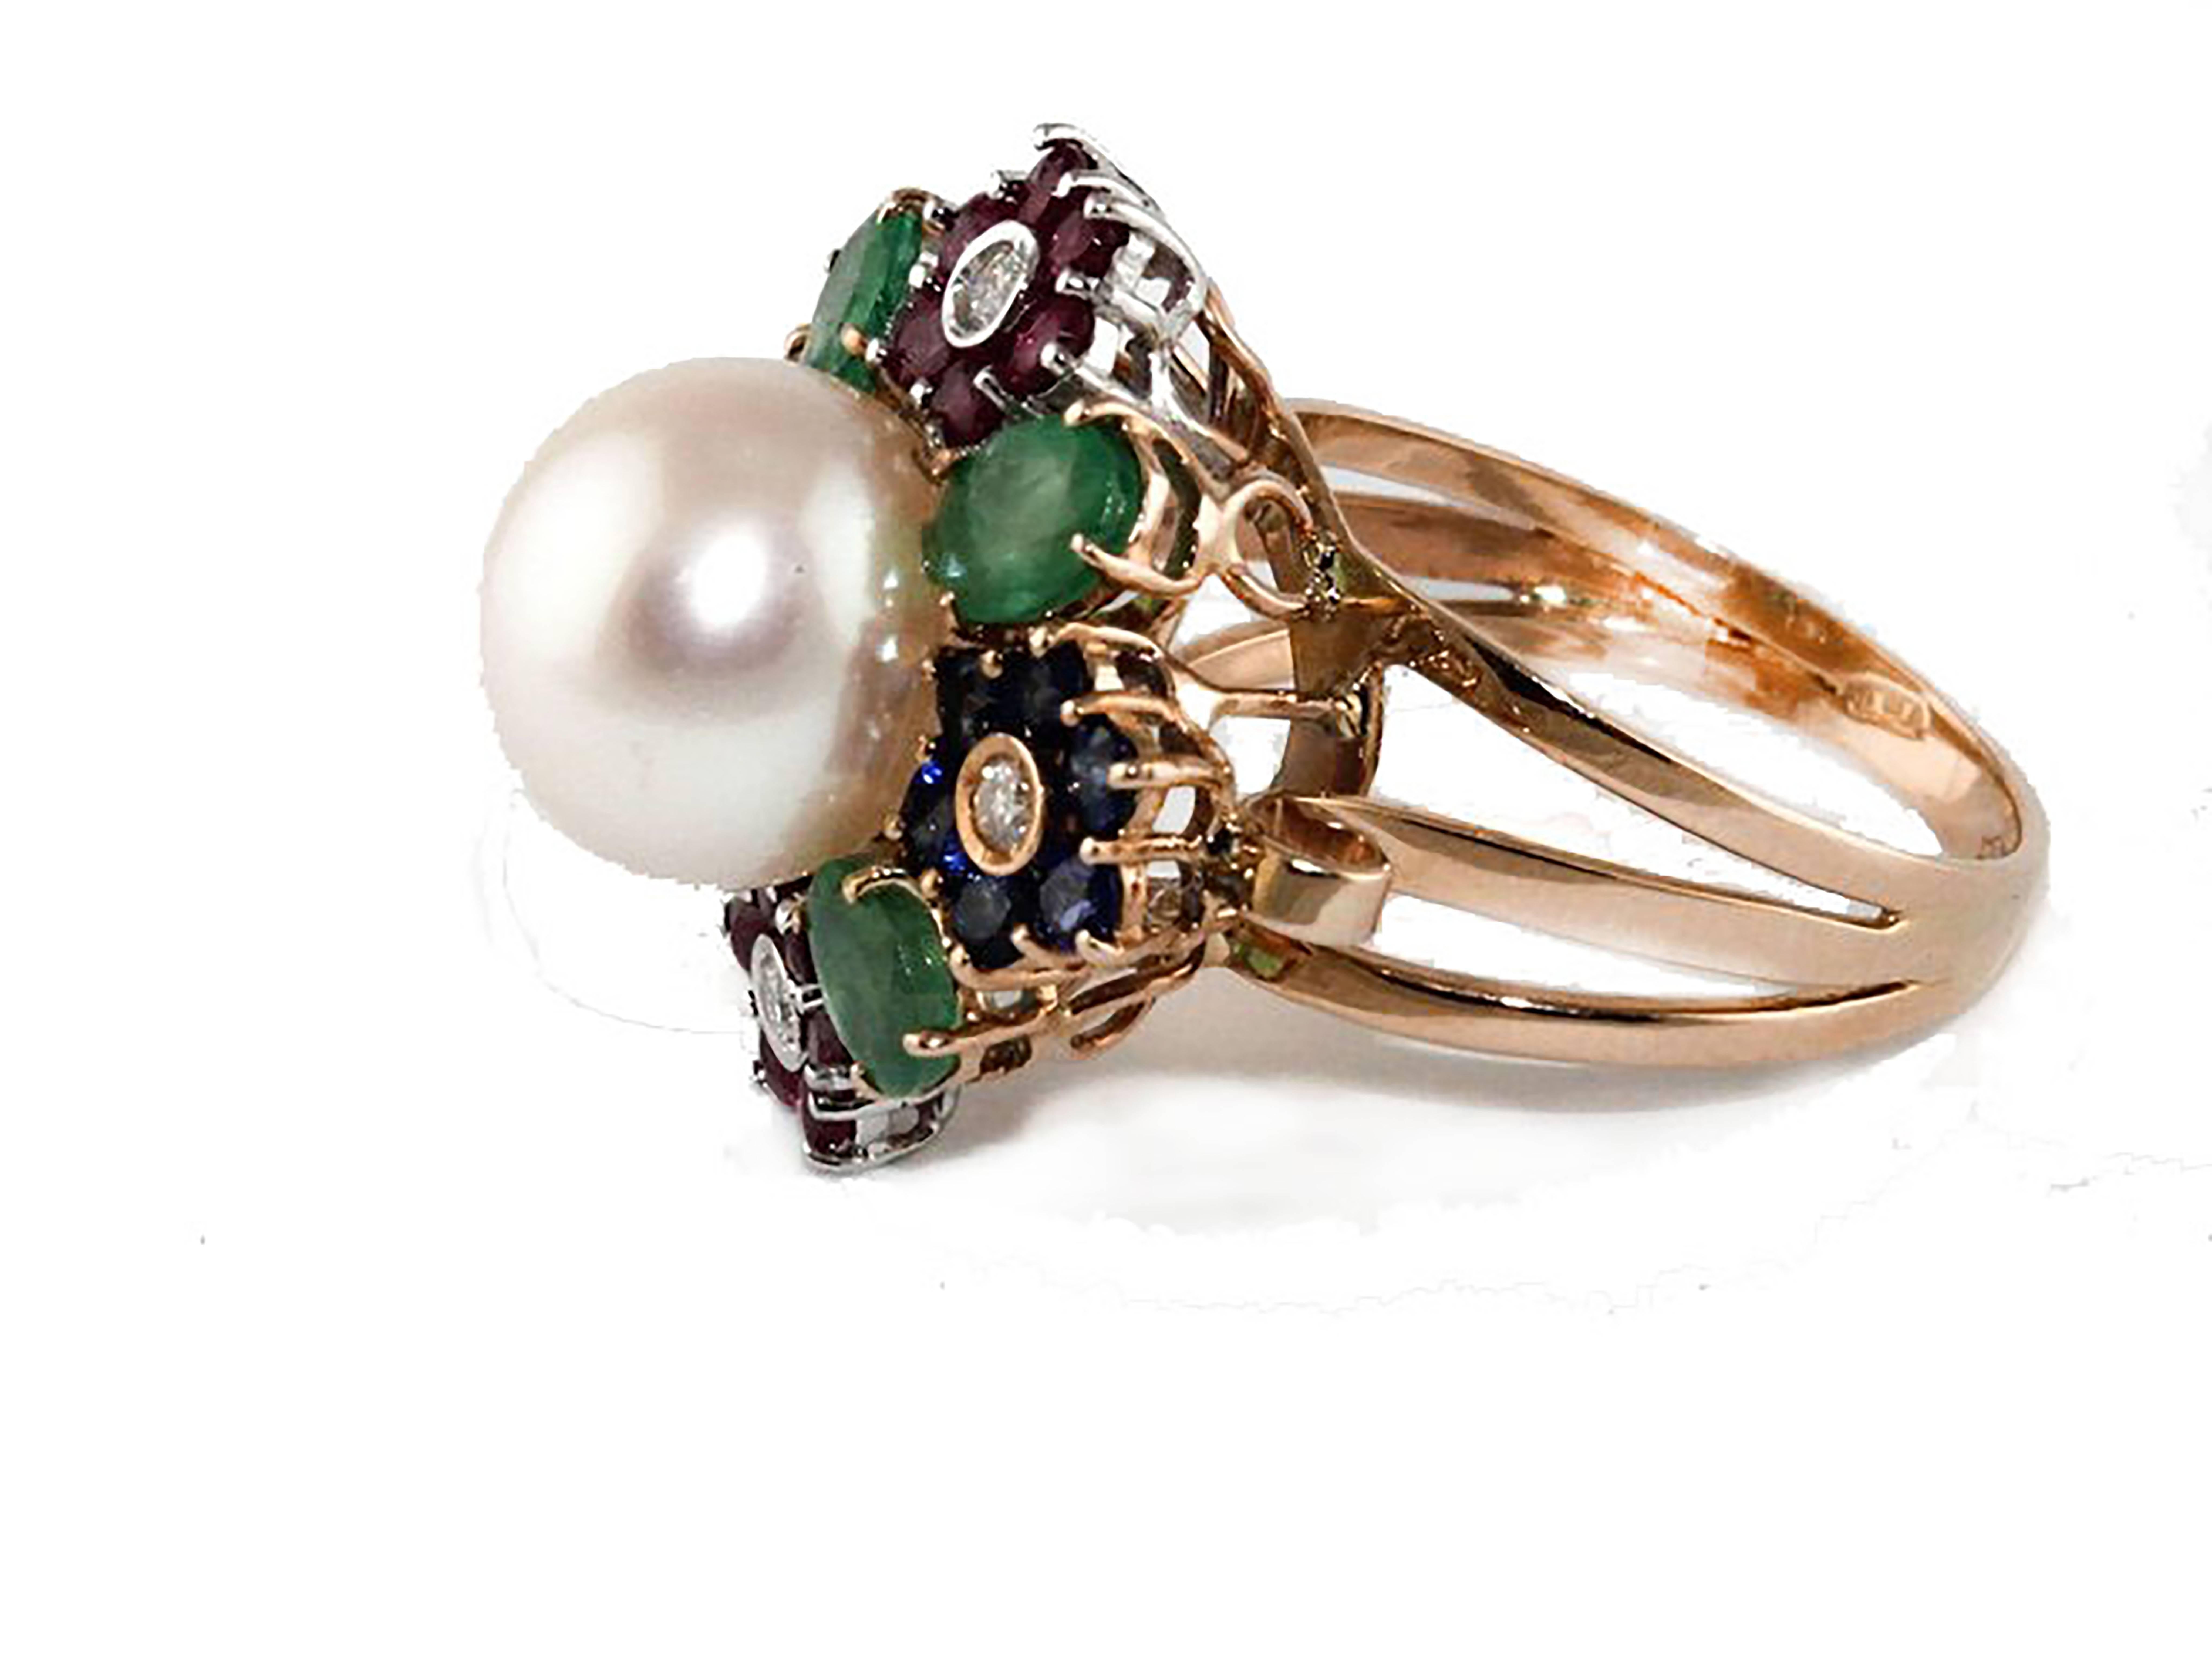 Wonderful ring in 14 kt rose gold, 8.20 g, with 0.15 ct diamonds, enriched with fantastic small flowers and ruby sapphire and emerald leafs of 3.20 ct and a 10 mm pearl from g1.70.
Diamonds ct 0.15
Sapphires Emeralds Rubies ct 3.20
Pearl g 1.70 / mm